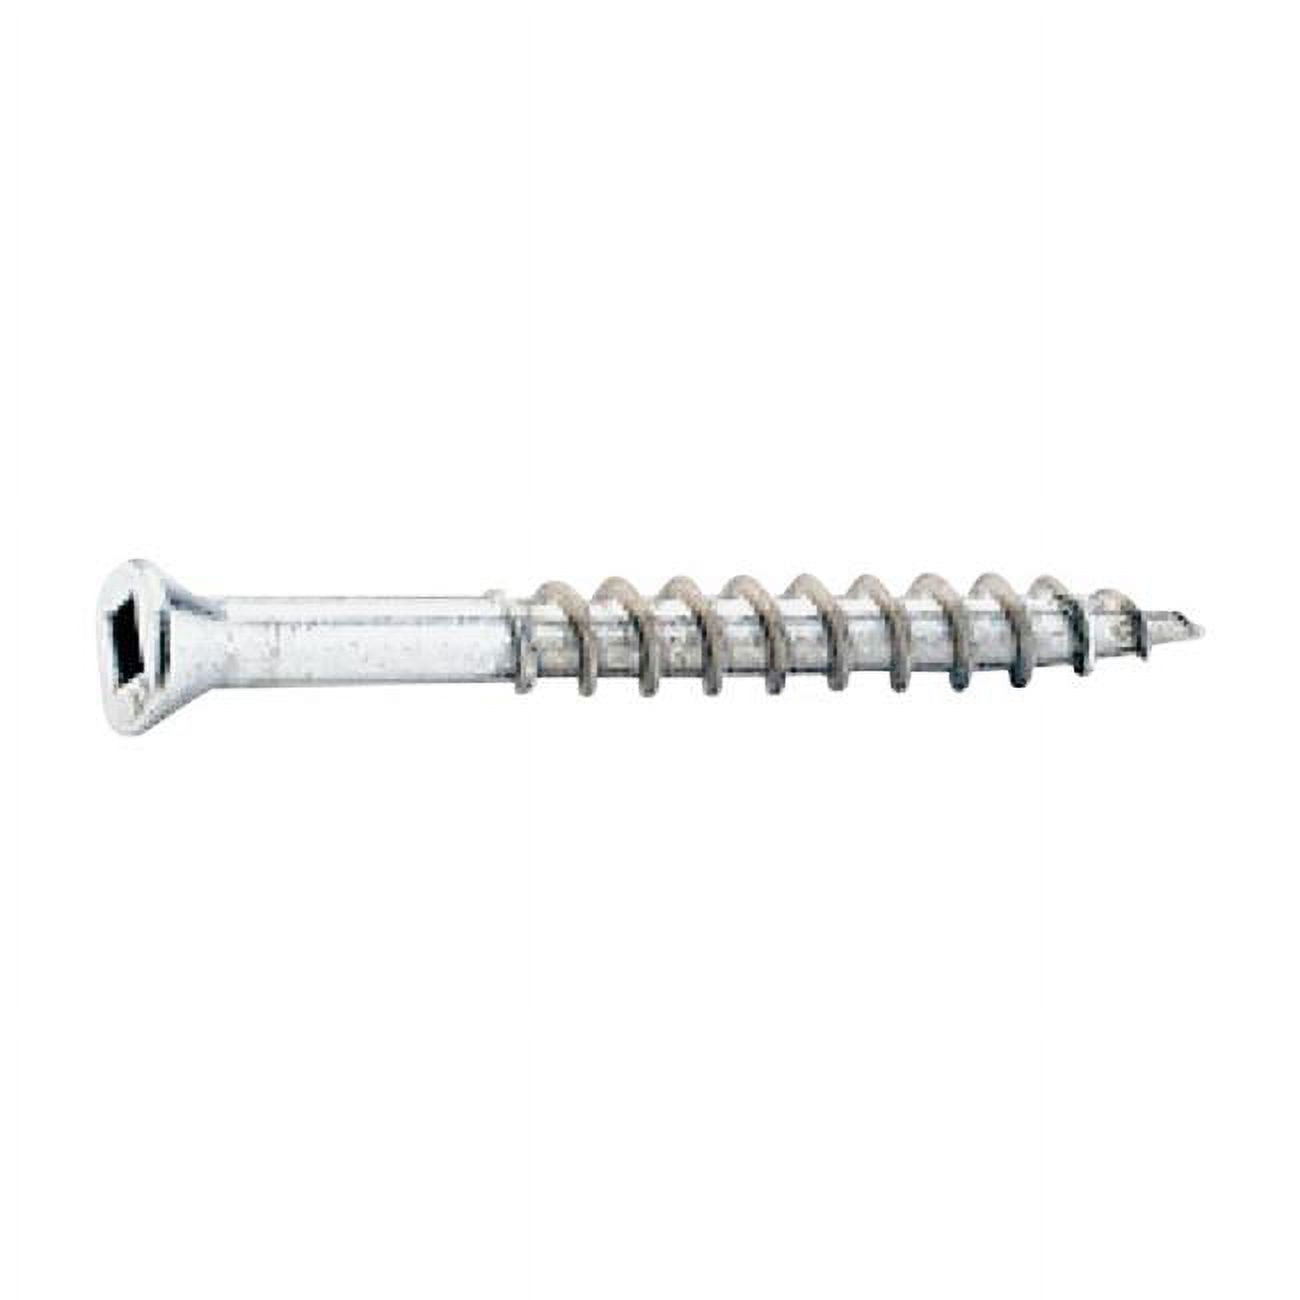 5007684 1 Lbs No.7 X 2.25 In. Square Trim Head White Stainless Steel Screws, Pack Of 12